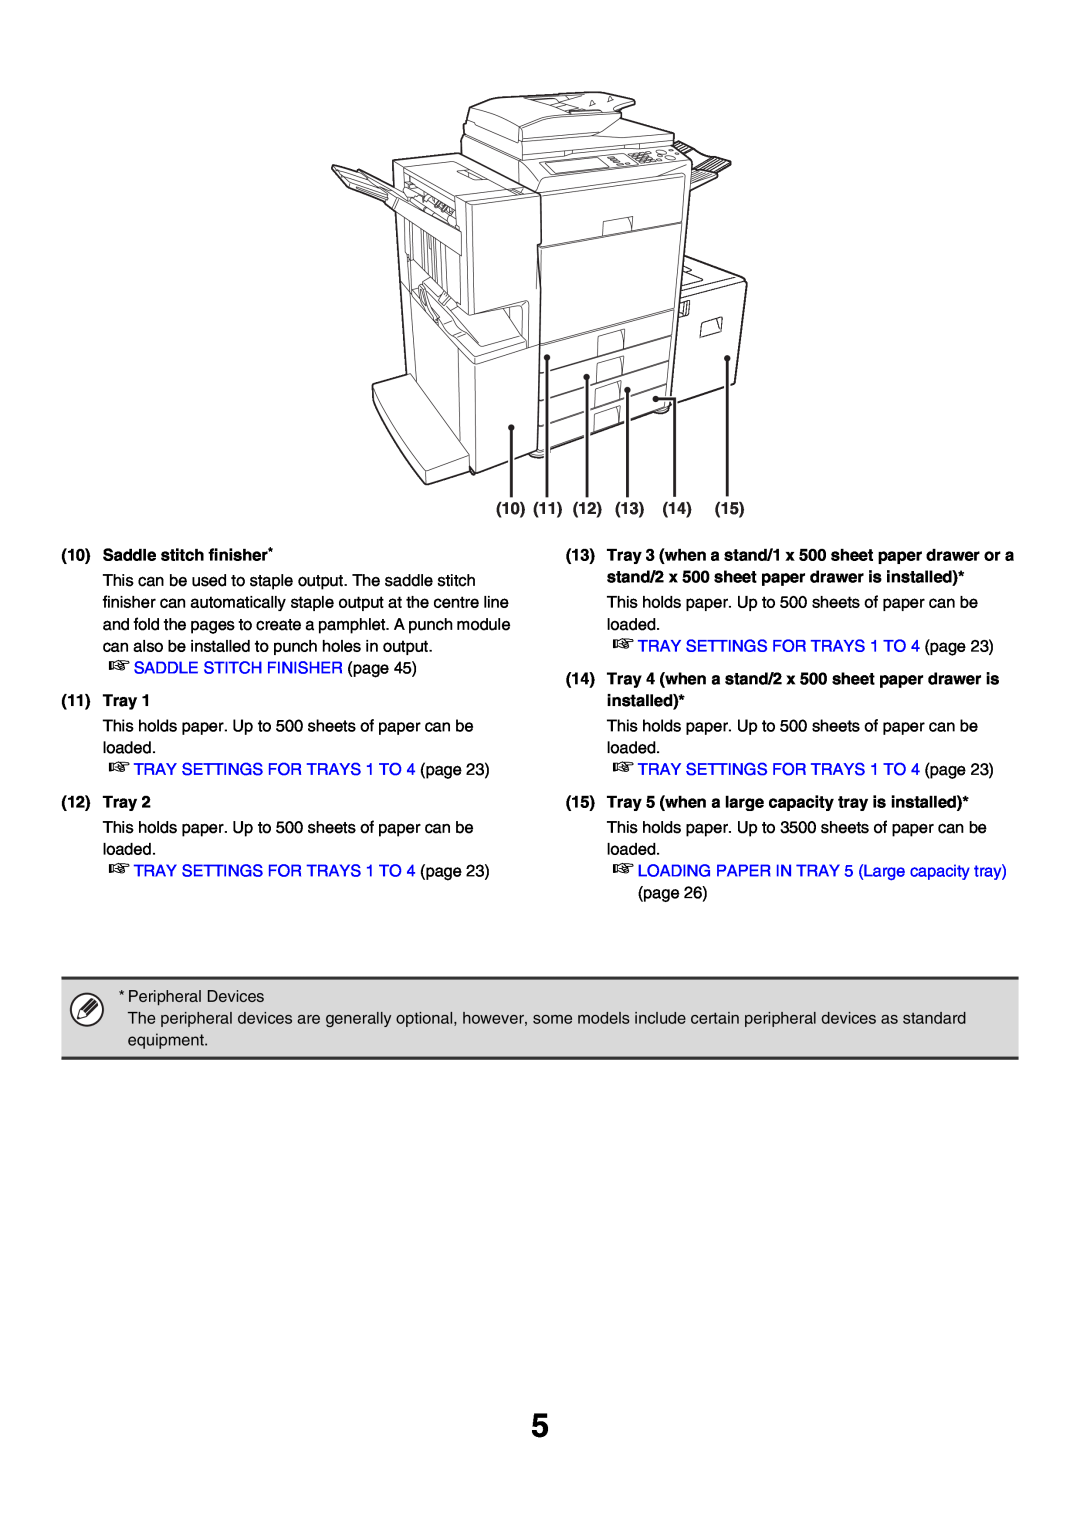 Sharp MX-3500N manual SADDLE STITCH FINISHER page, TRAY SETTINGS FOR TRAYS 1 TO 4 page 